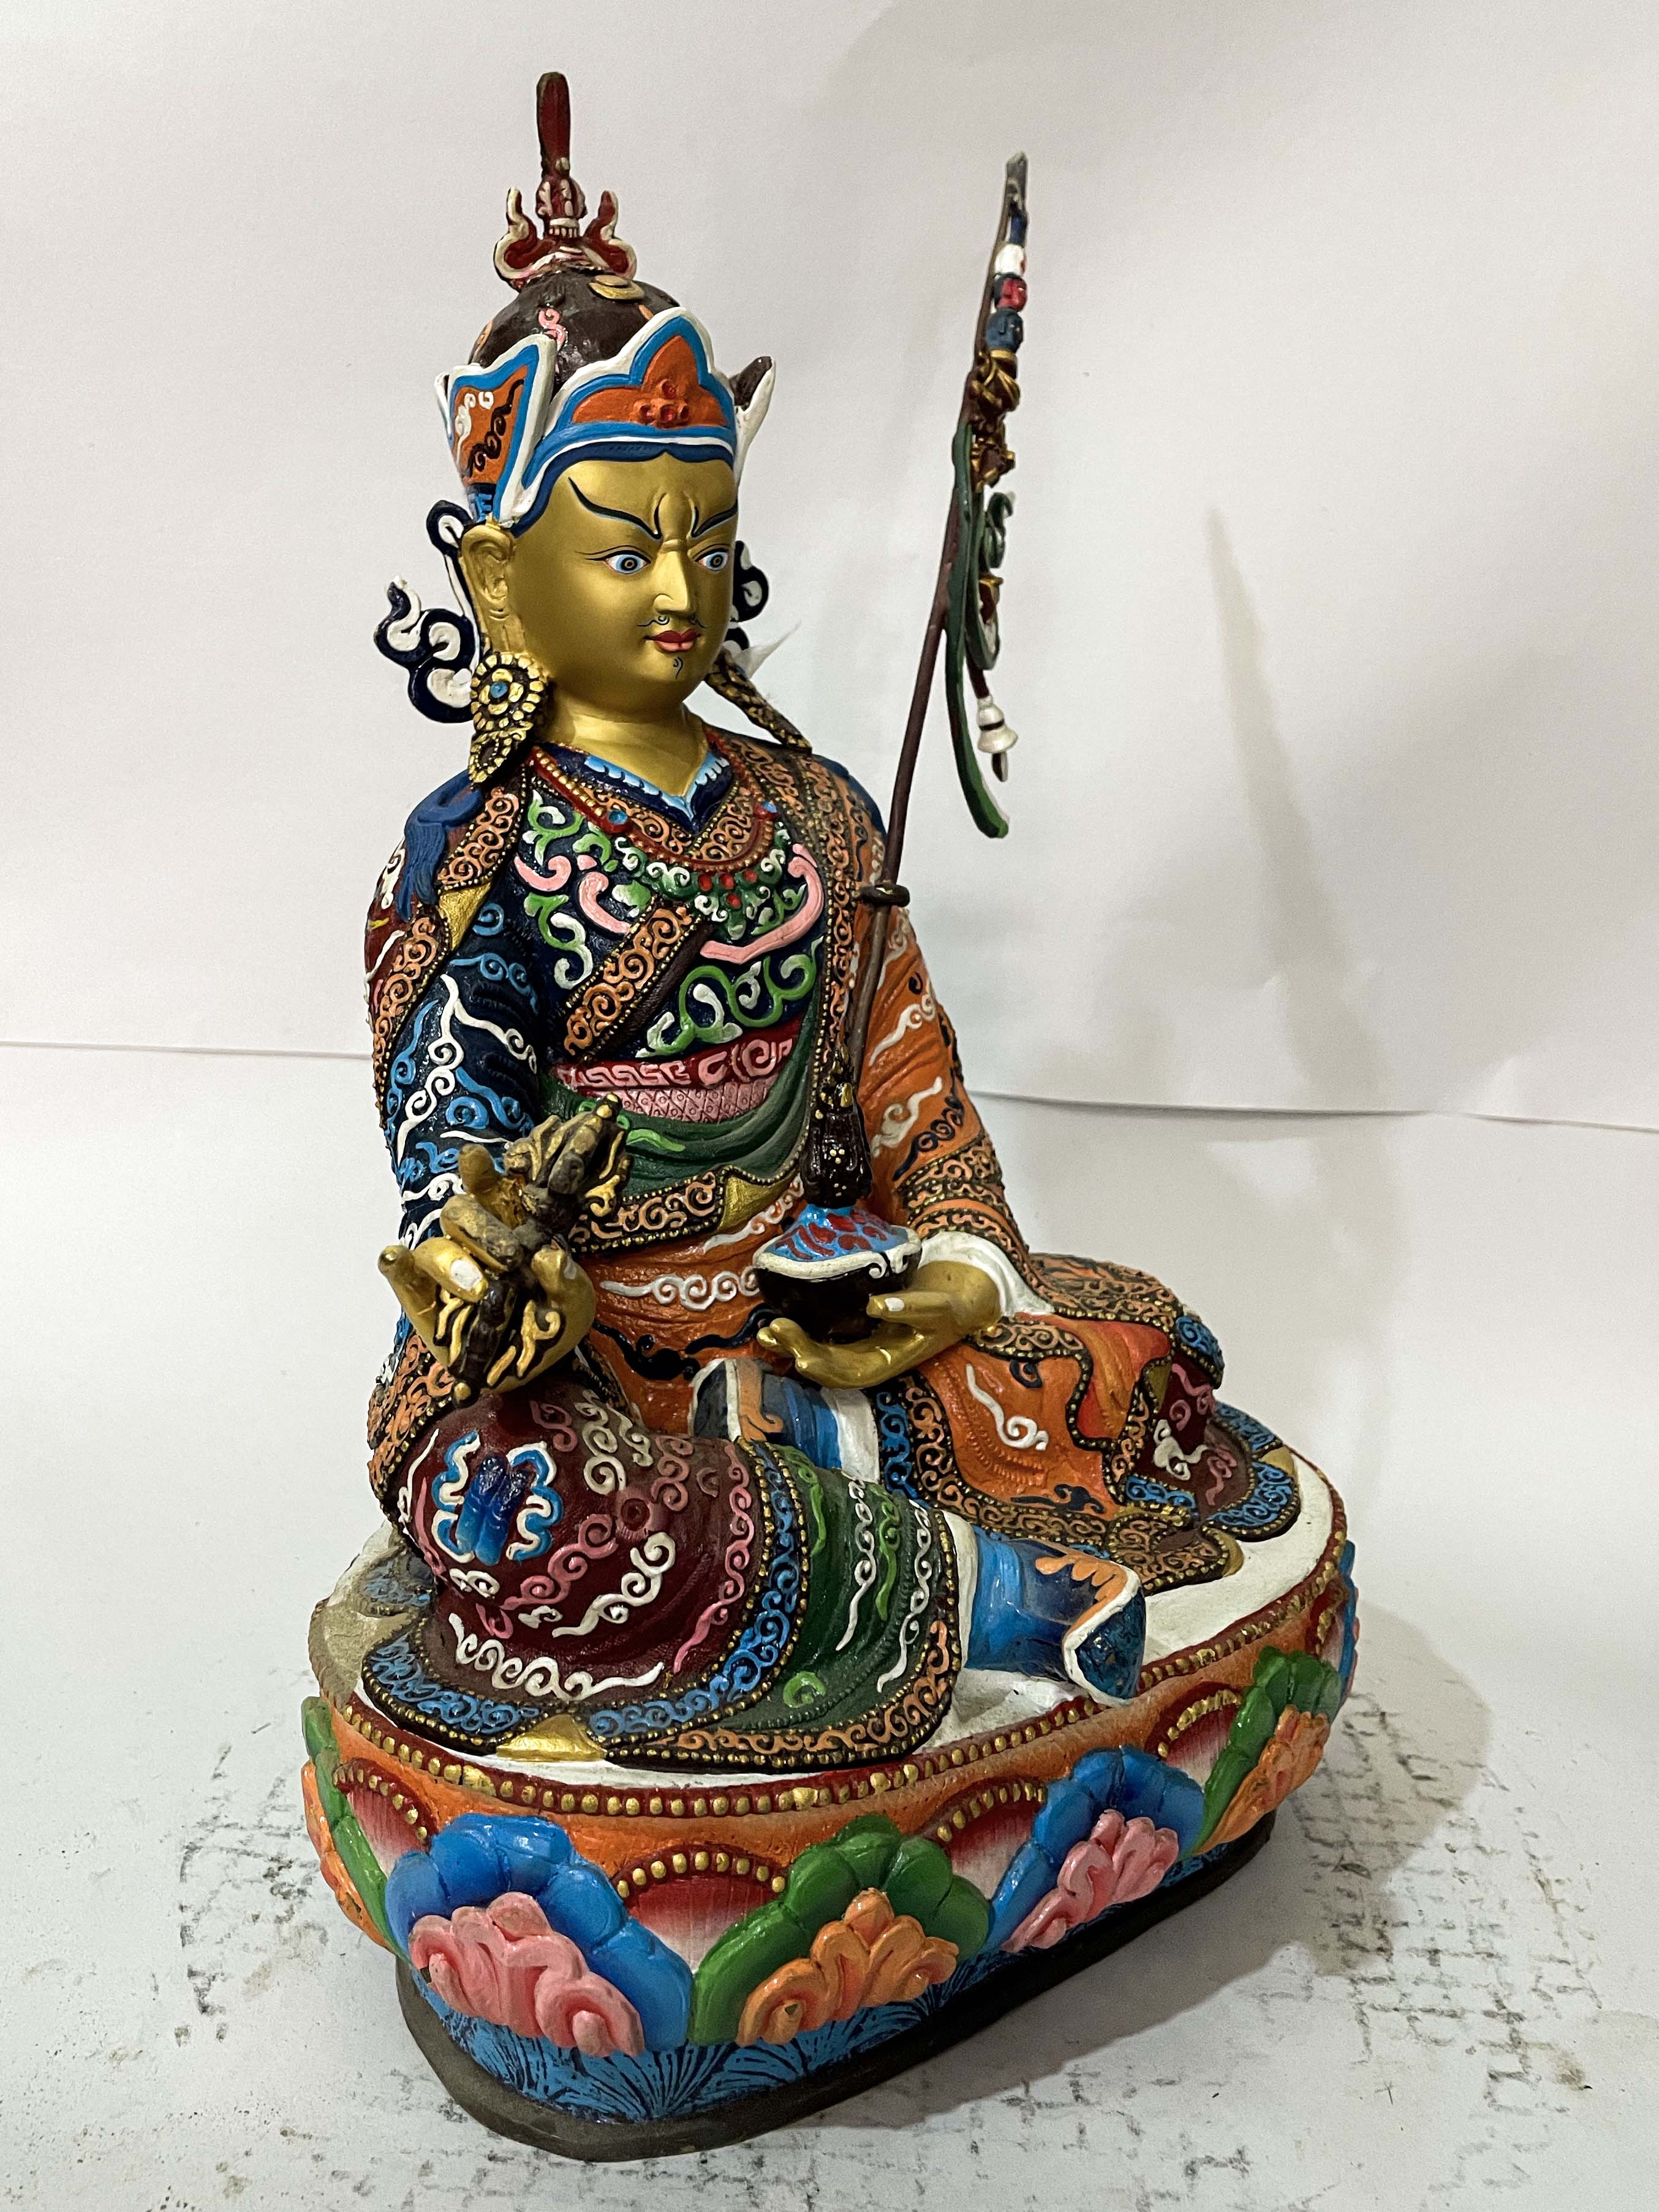 master Quality, Hq, Buddhist Statue Of Padmasambhava, traditional Color, Face Painted